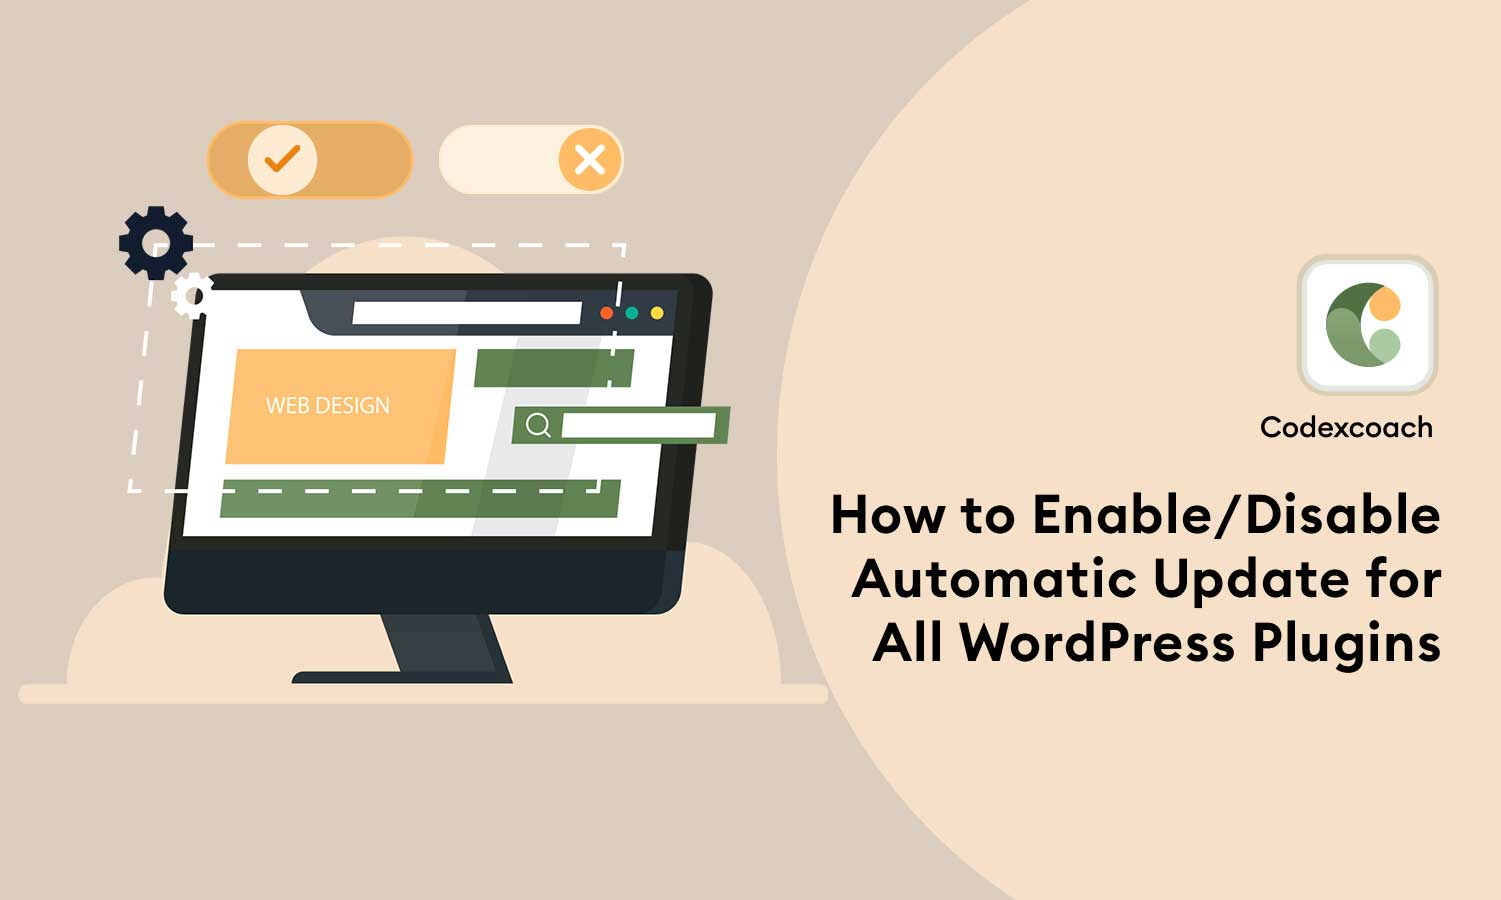 How to Enable Disable Automatic Update for All WordPress Plugins